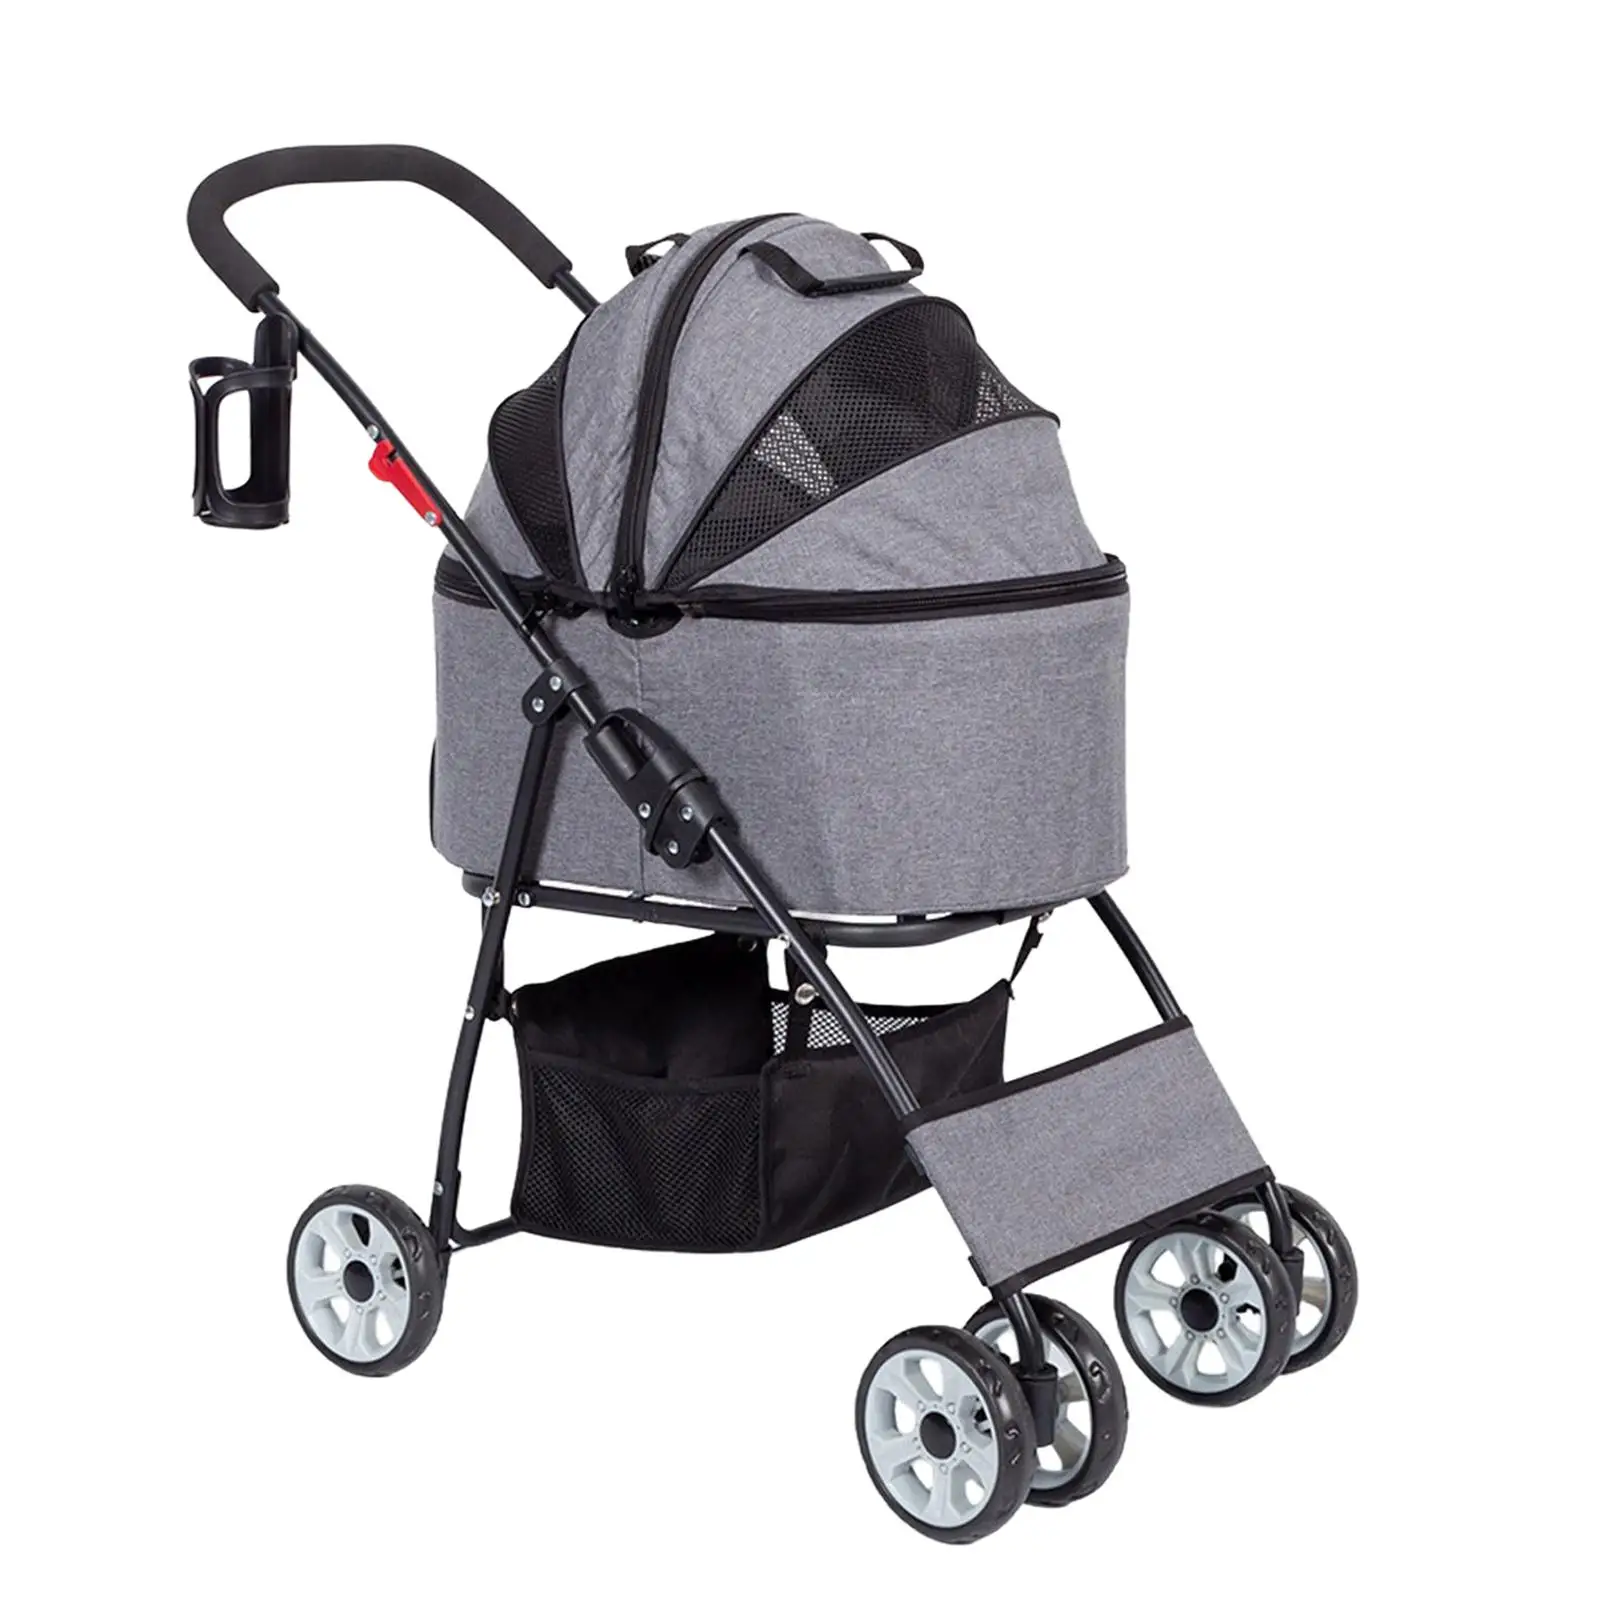 Portable Dog Stroller Folding Go Out Cart with Storage Basket with Mesh Top Pet